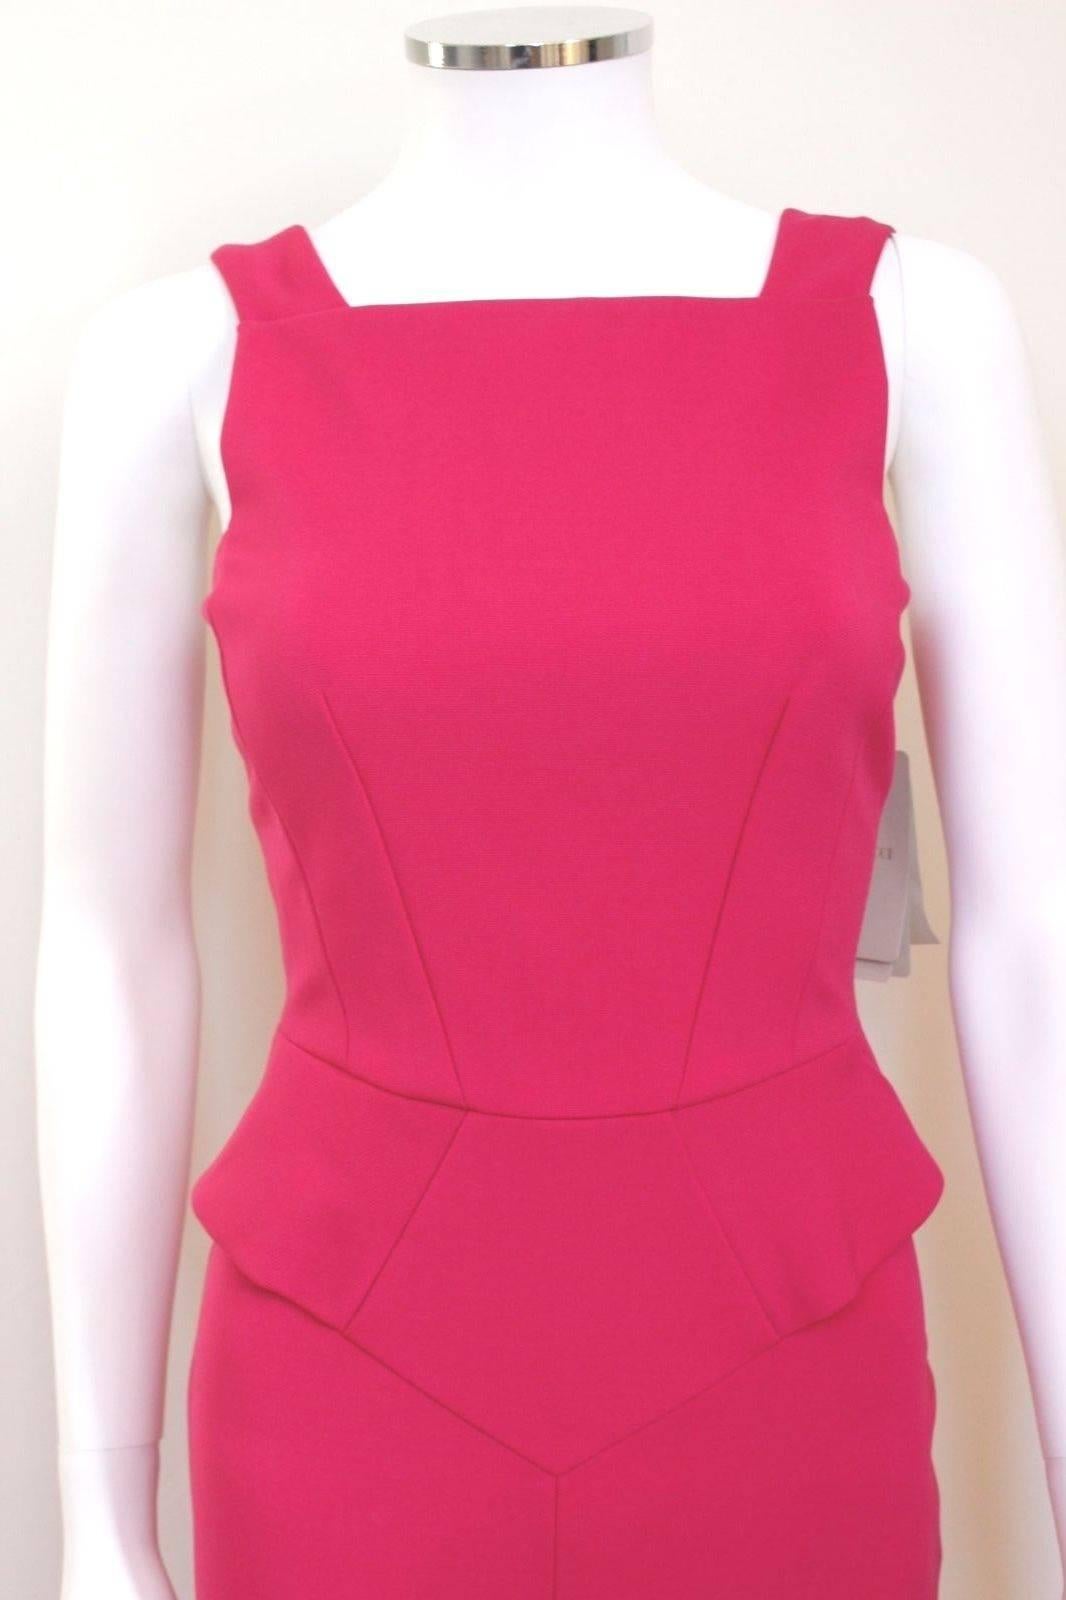 New EMILIO PUCCI Fuchsia Pink Stretch Dress IT 40 uk 8
Gorgeous electric fuschia sleeveless sheath dress by EMILIO PUCCI. 
In a thick stretch knit, this bodycon style features a square neck, and slinky pencil skirt with peplum stitching at the